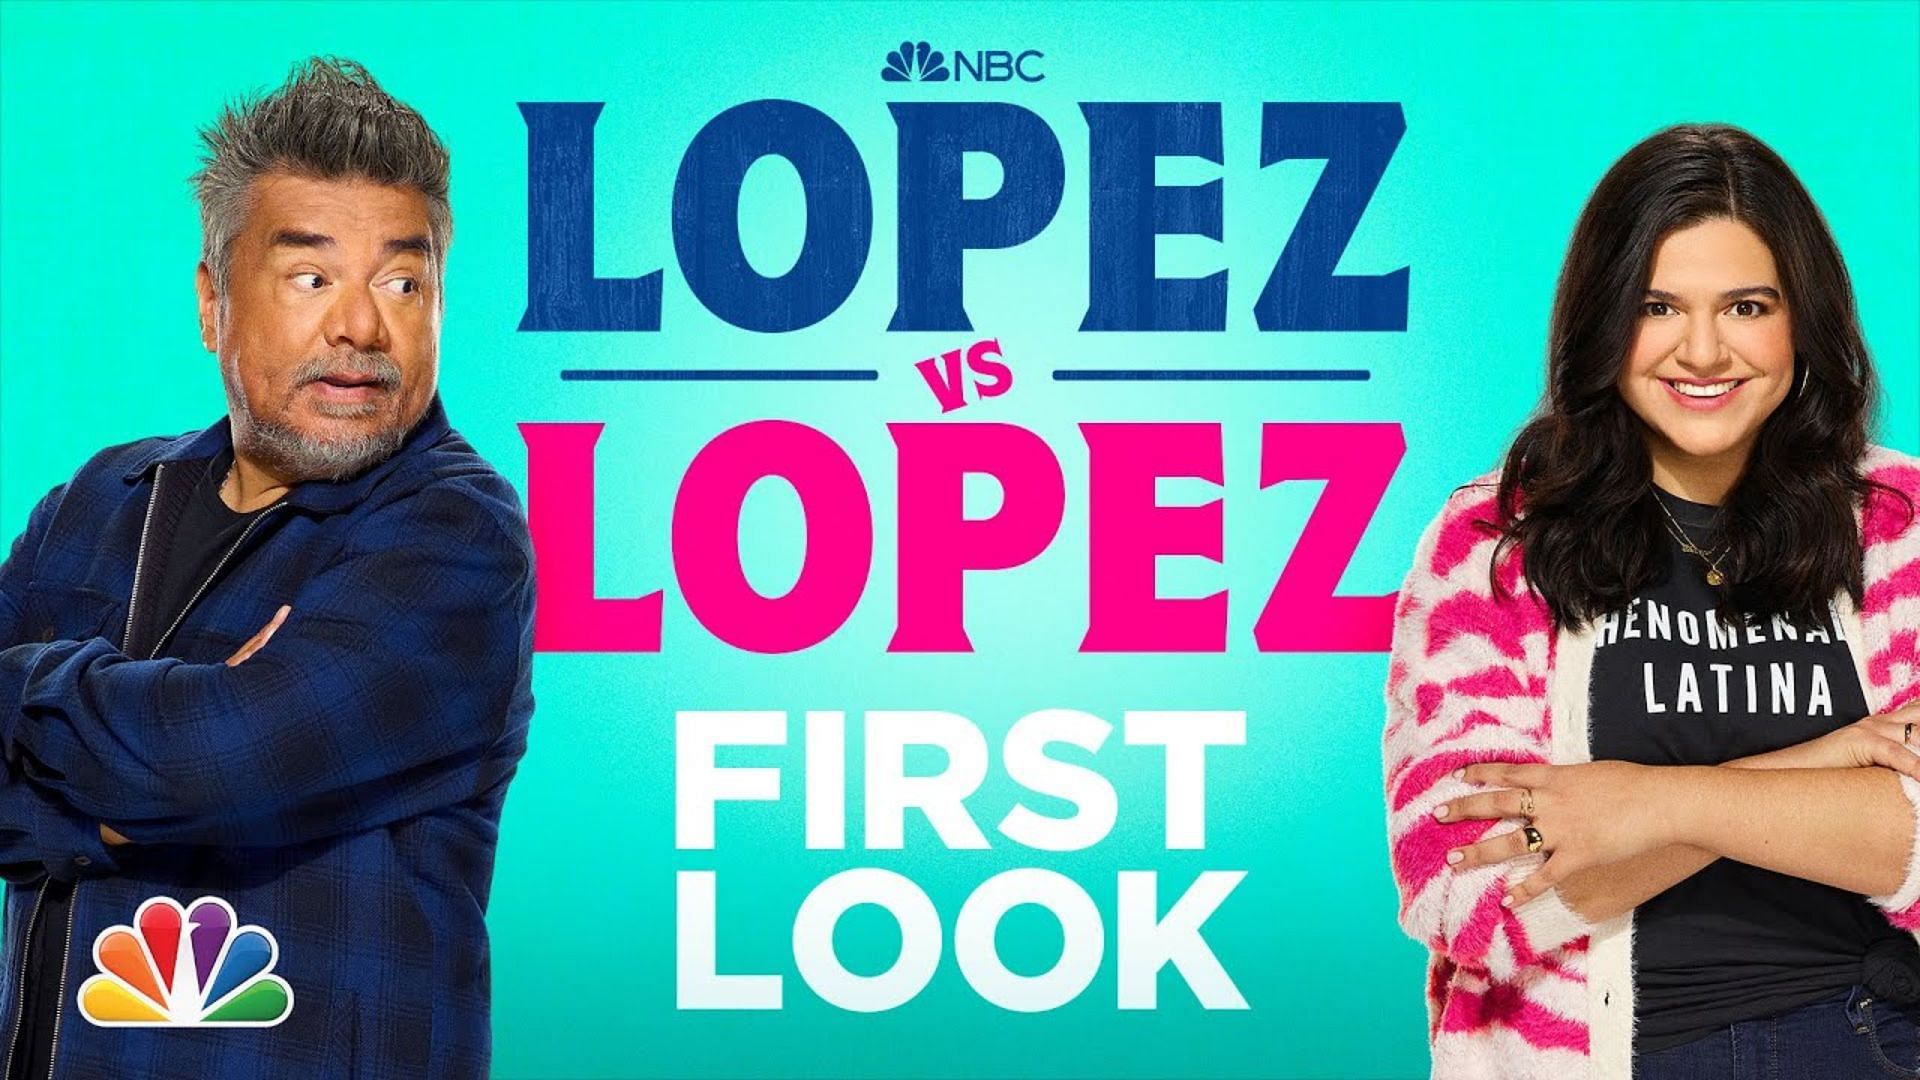 Lopez vs Lopez first look poster (image via YouTube/NBC)